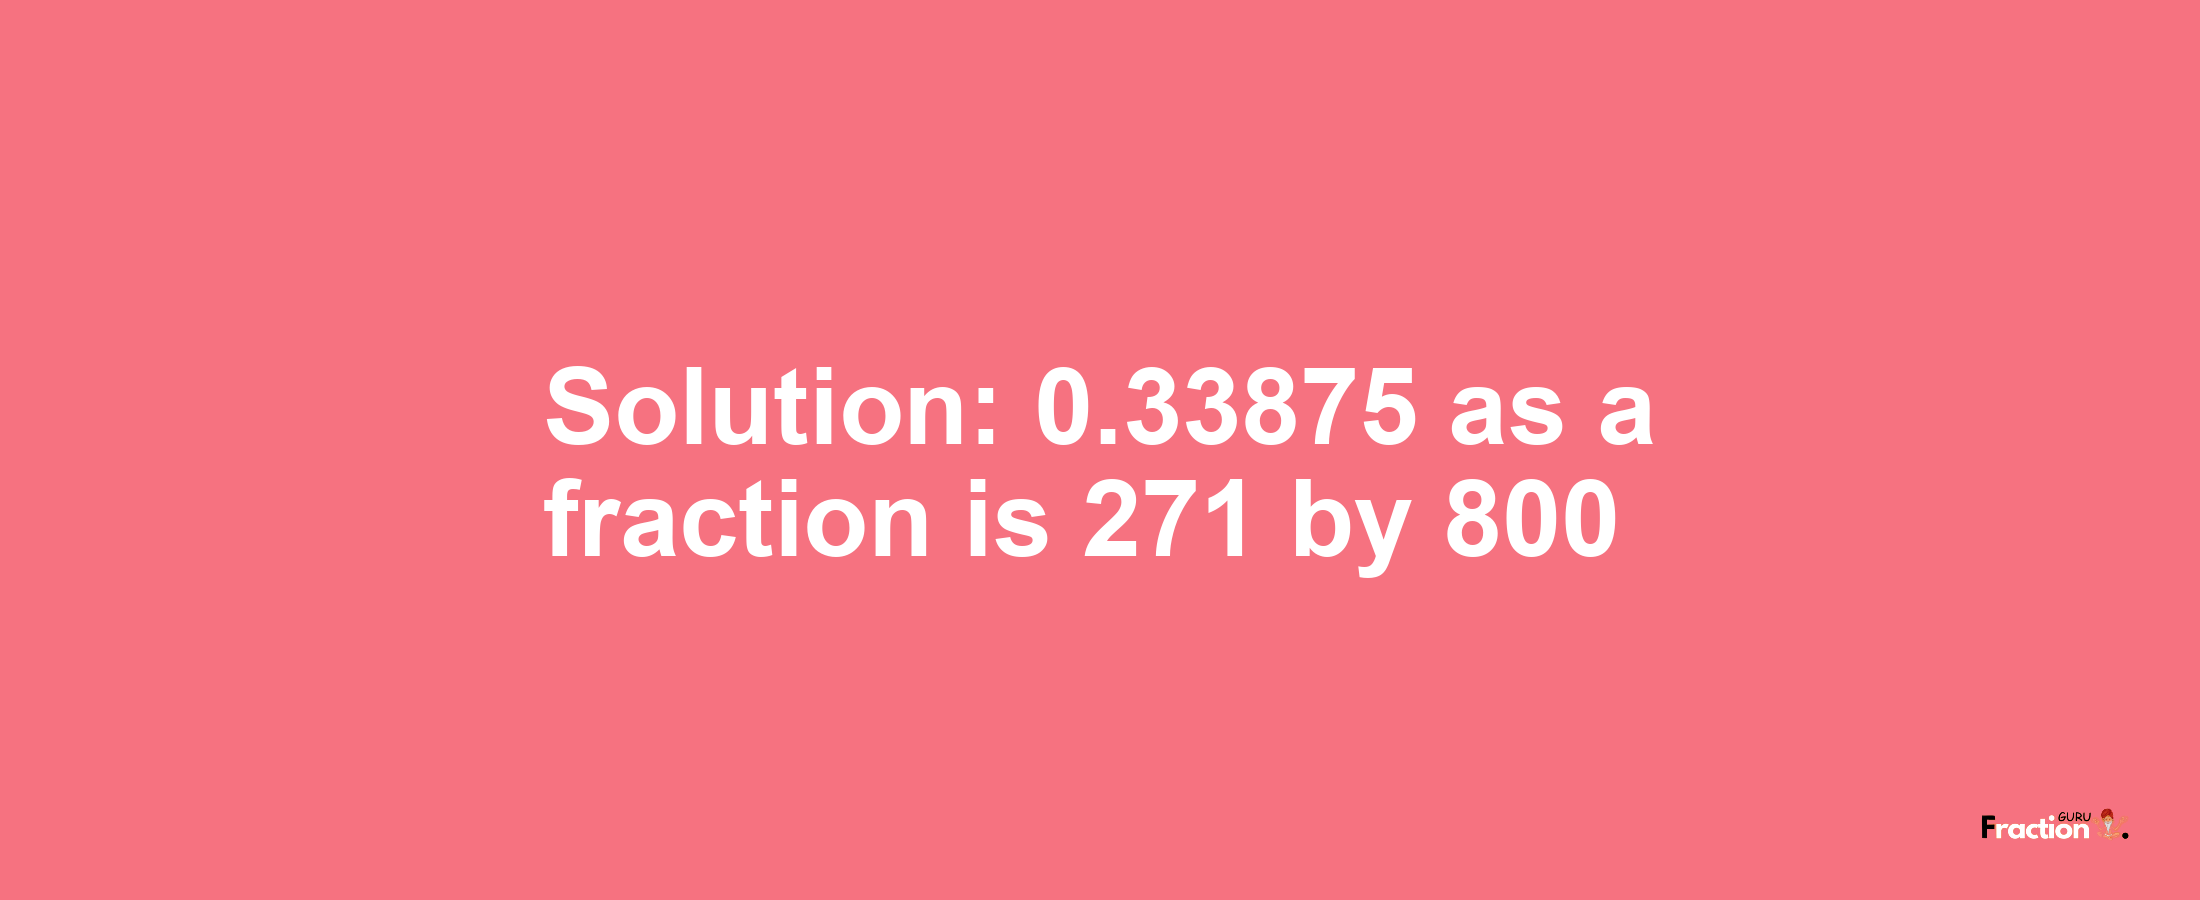 Solution:0.33875 as a fraction is 271/800